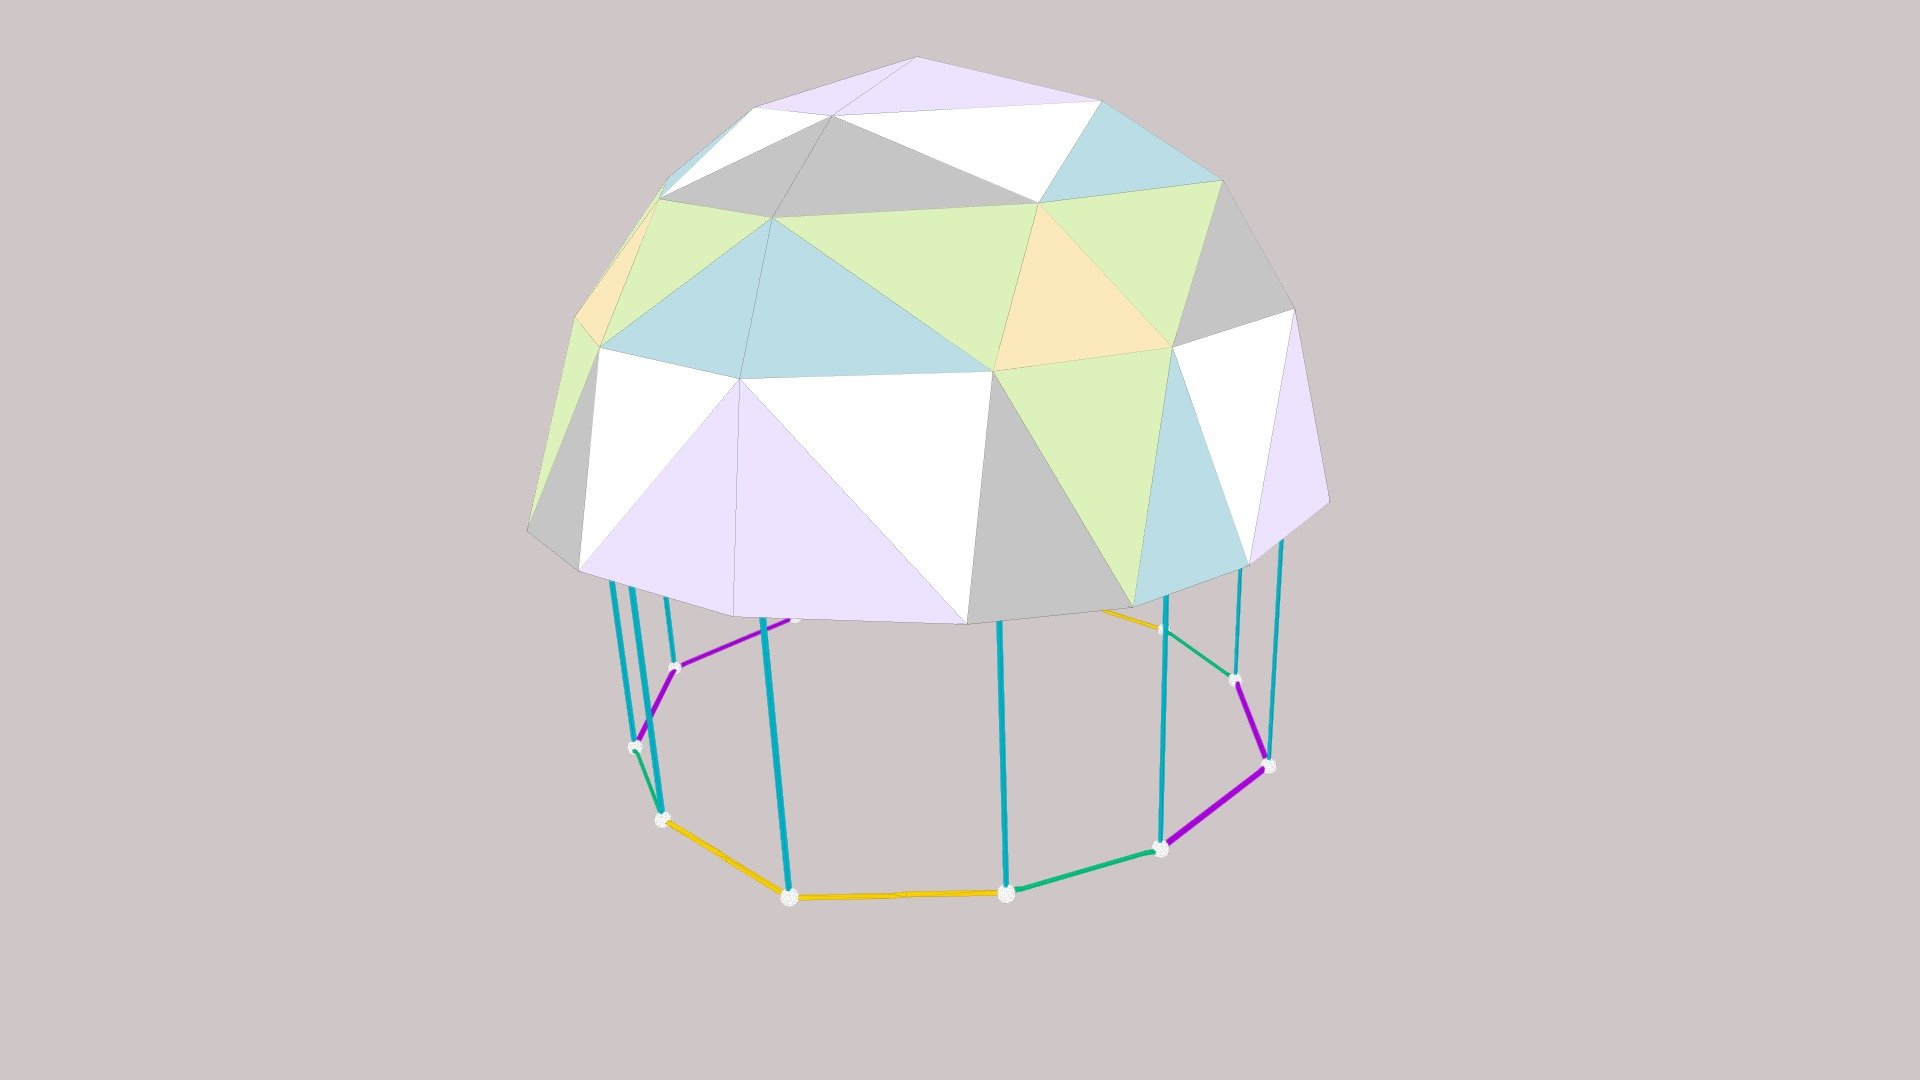 Octent Dome